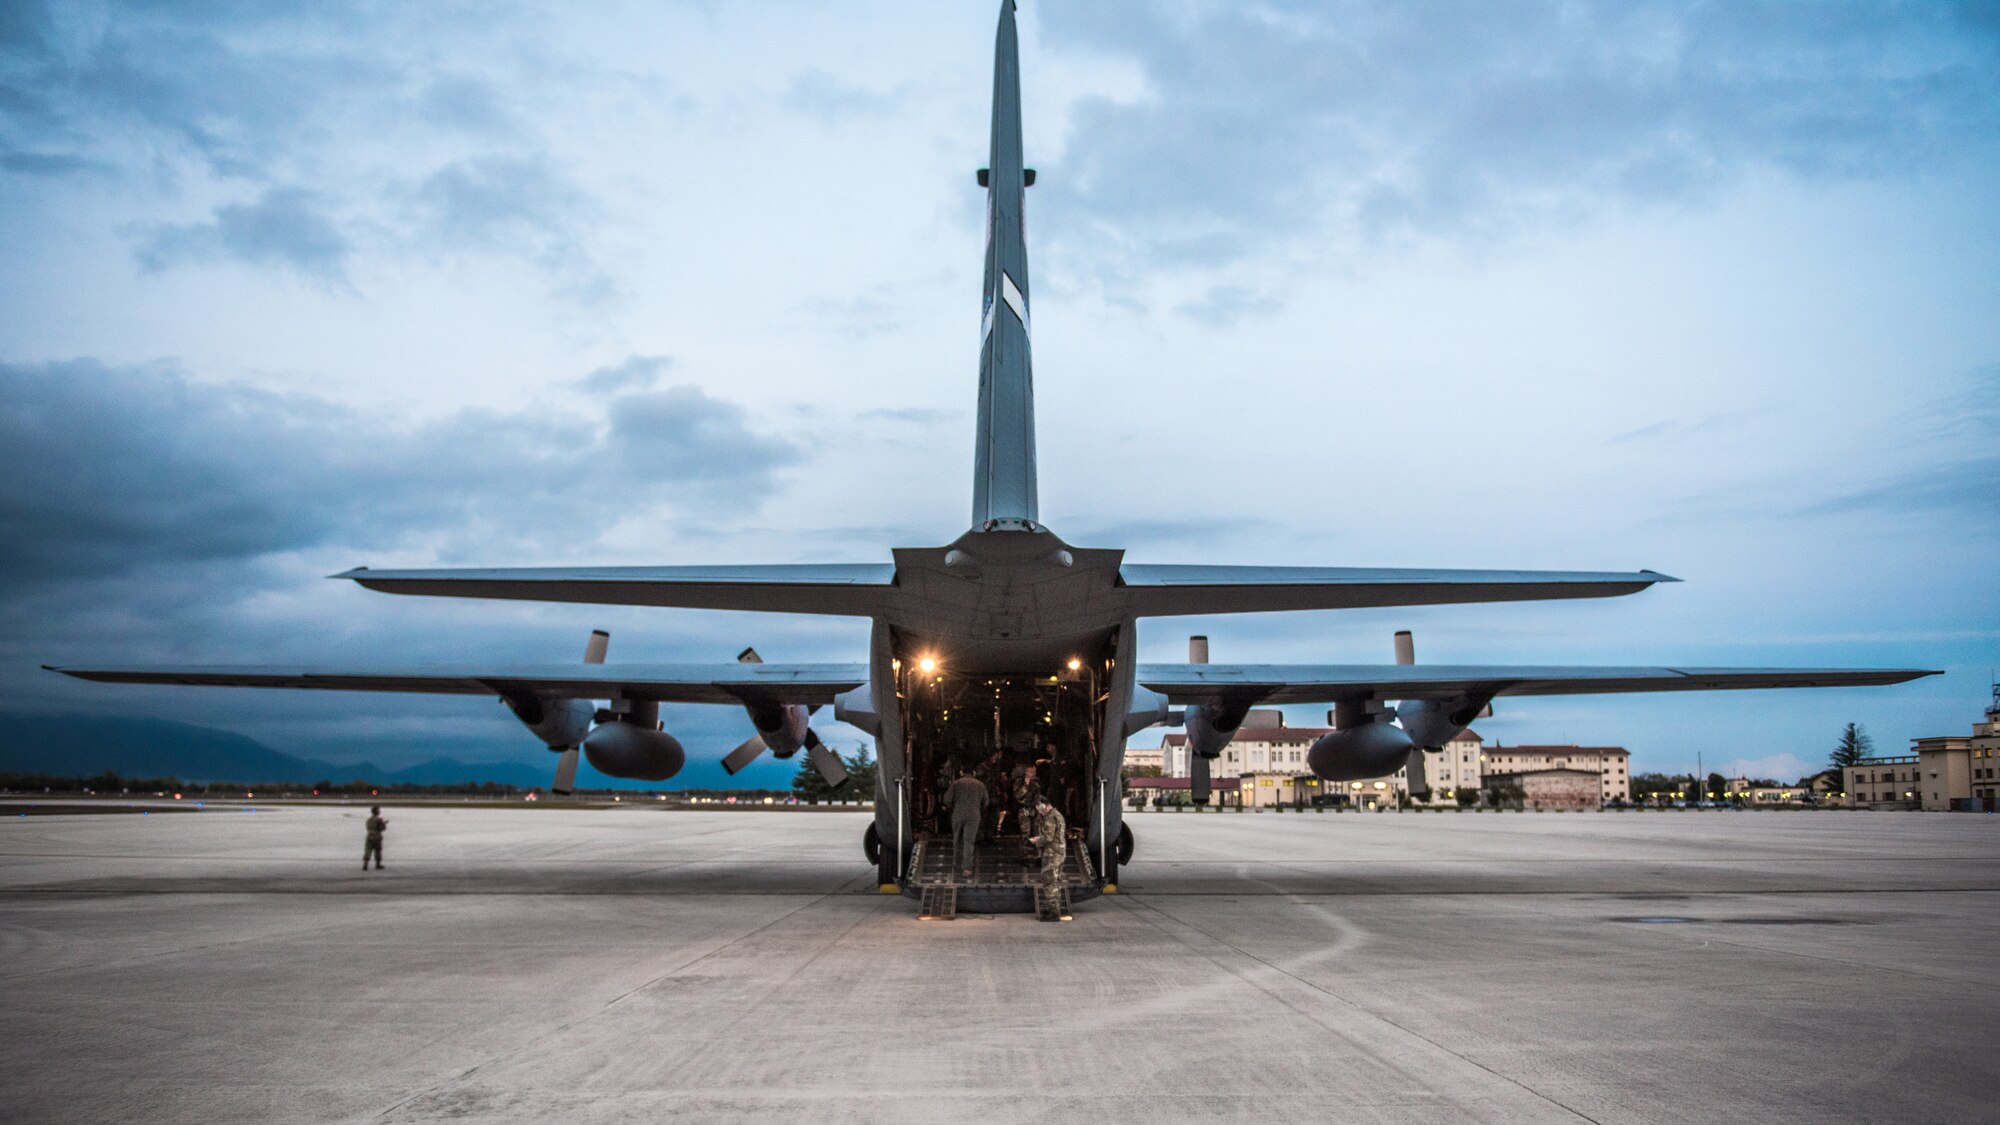 Kentucky Air Guardsmen from the 123rd Airlift Wing prepare to return from an airdrop mission with members of the Italian Army Folgore paratrooper brigade at Aviano Air Base, Italy, on Nov. 7, 2019. The mission was part of Mangusta 19, a bi-lateral exercise designed to promote readiness and interoperability among NATO allies. (U.S. Air National Guard photo by Senior Airman Chloe Ochs)